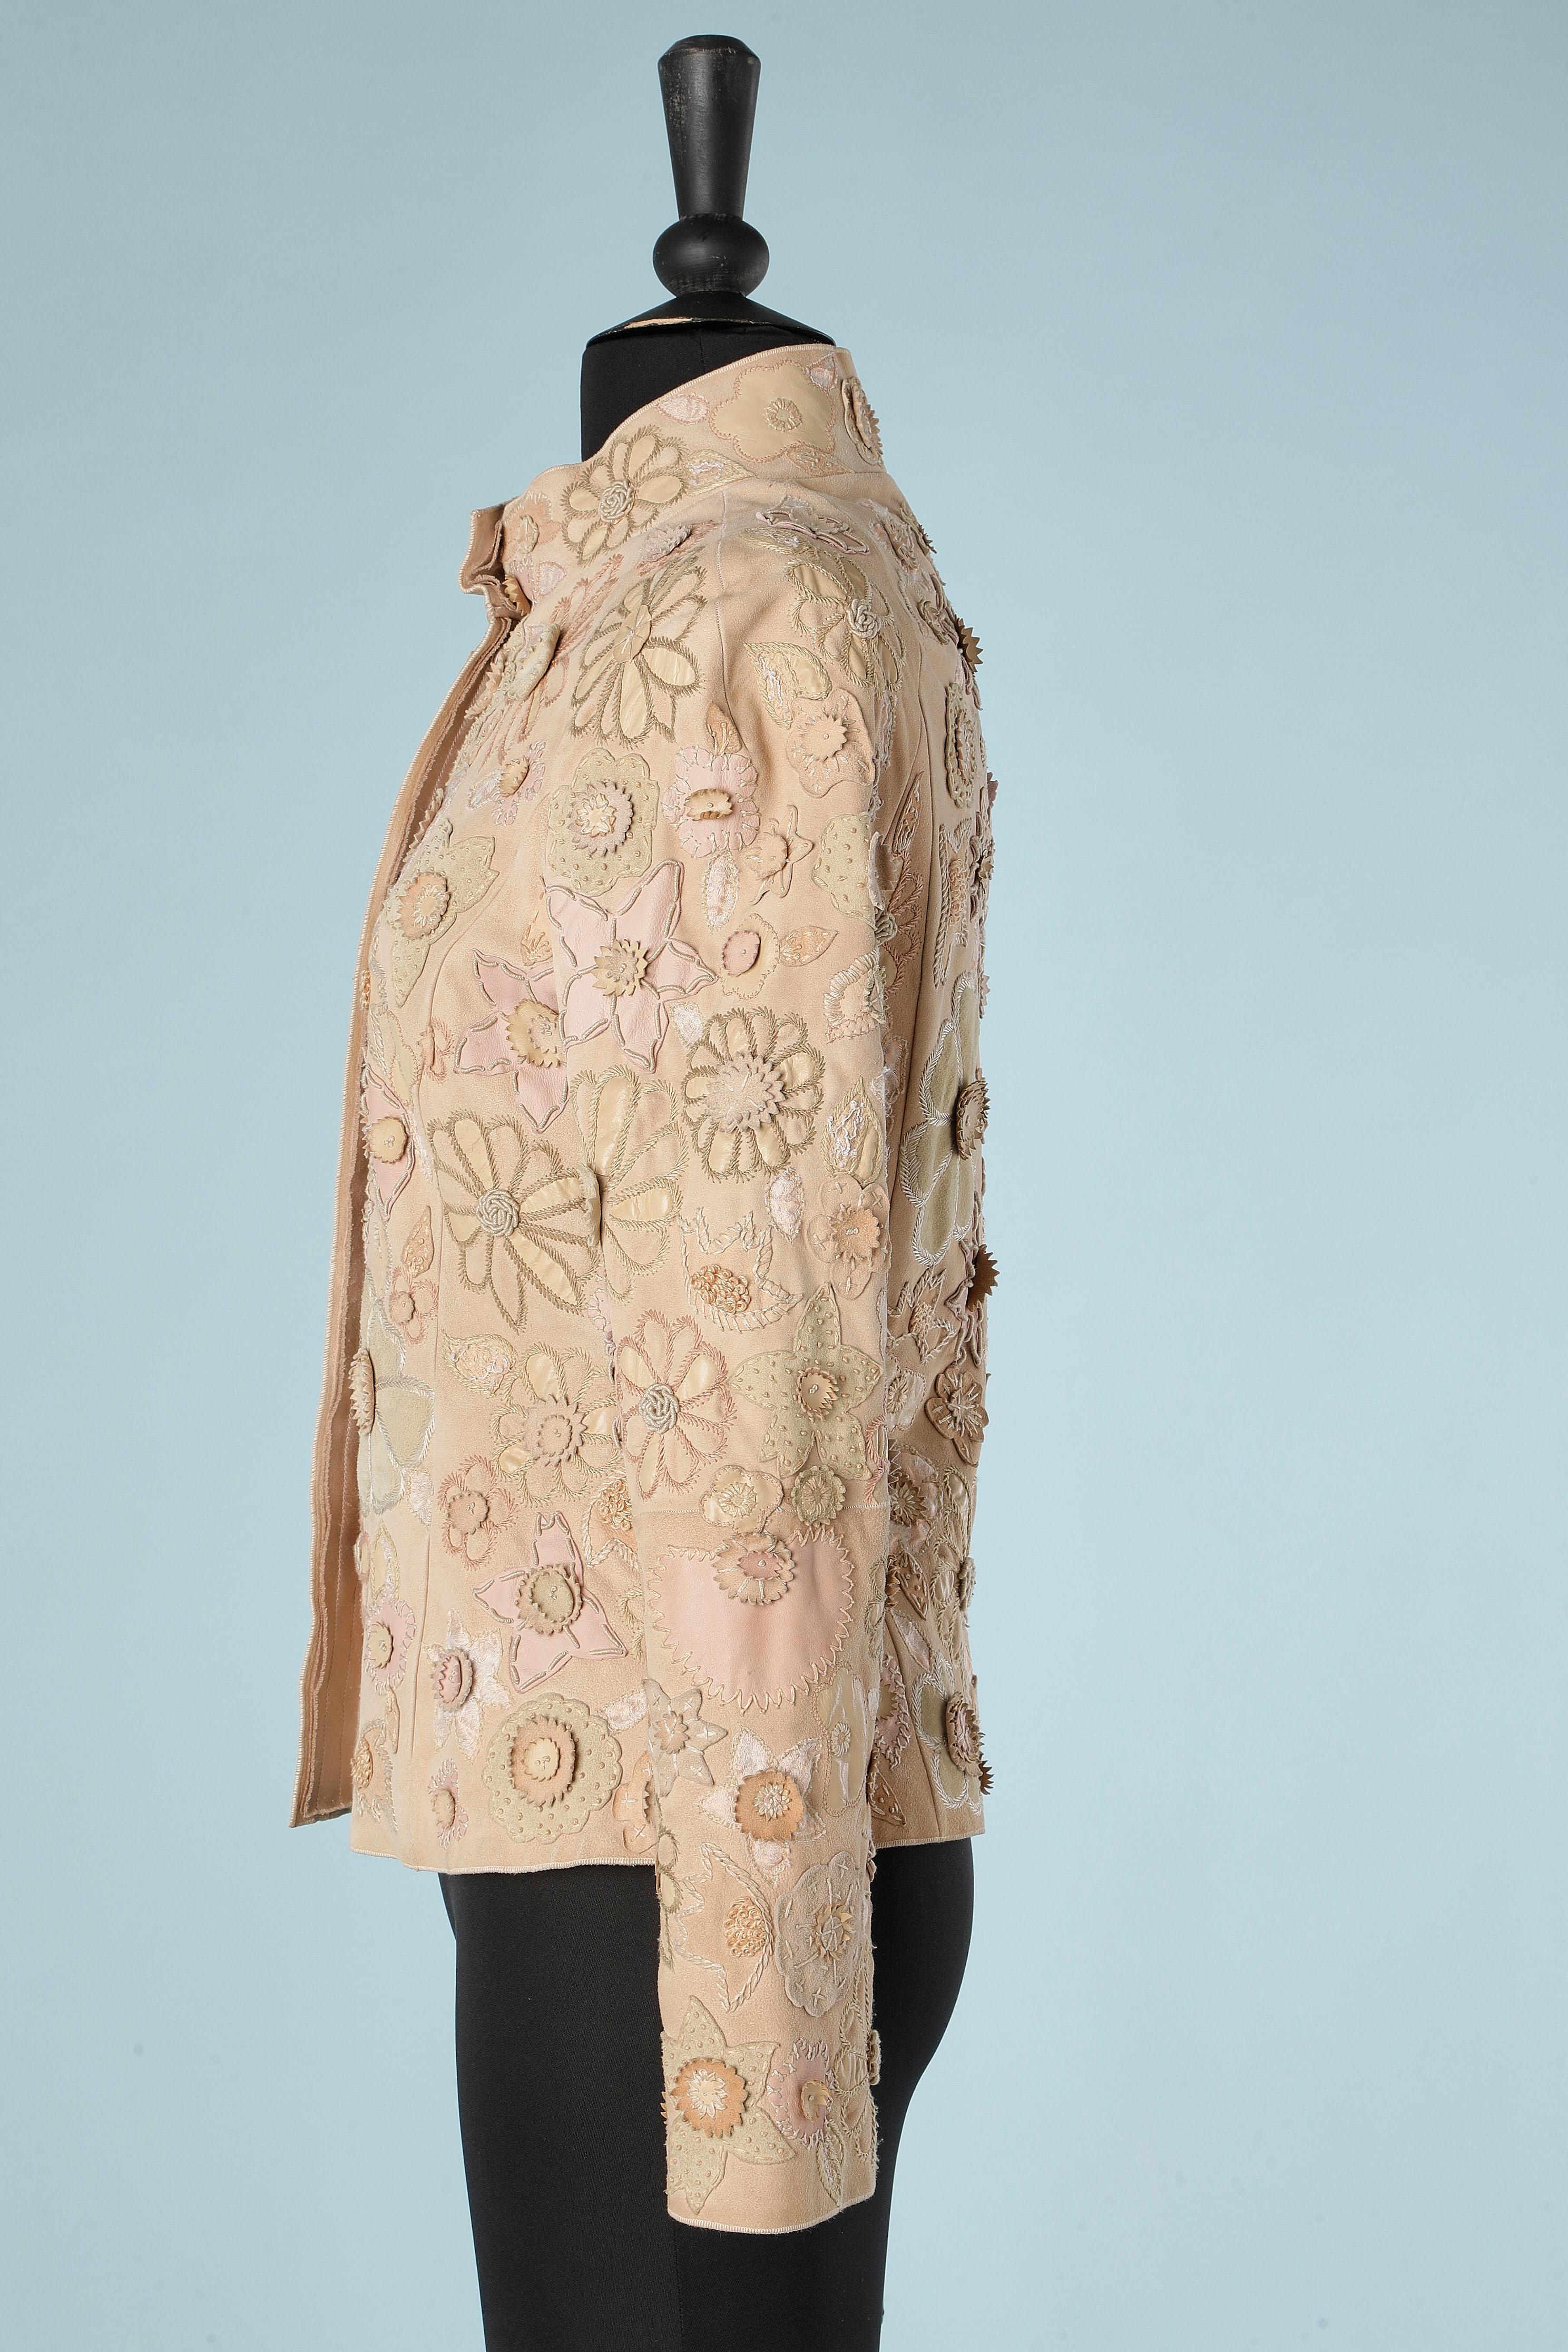 Pinkish beige suede jacket with suede and leather flowers appliqué J Mendel For Sale 1